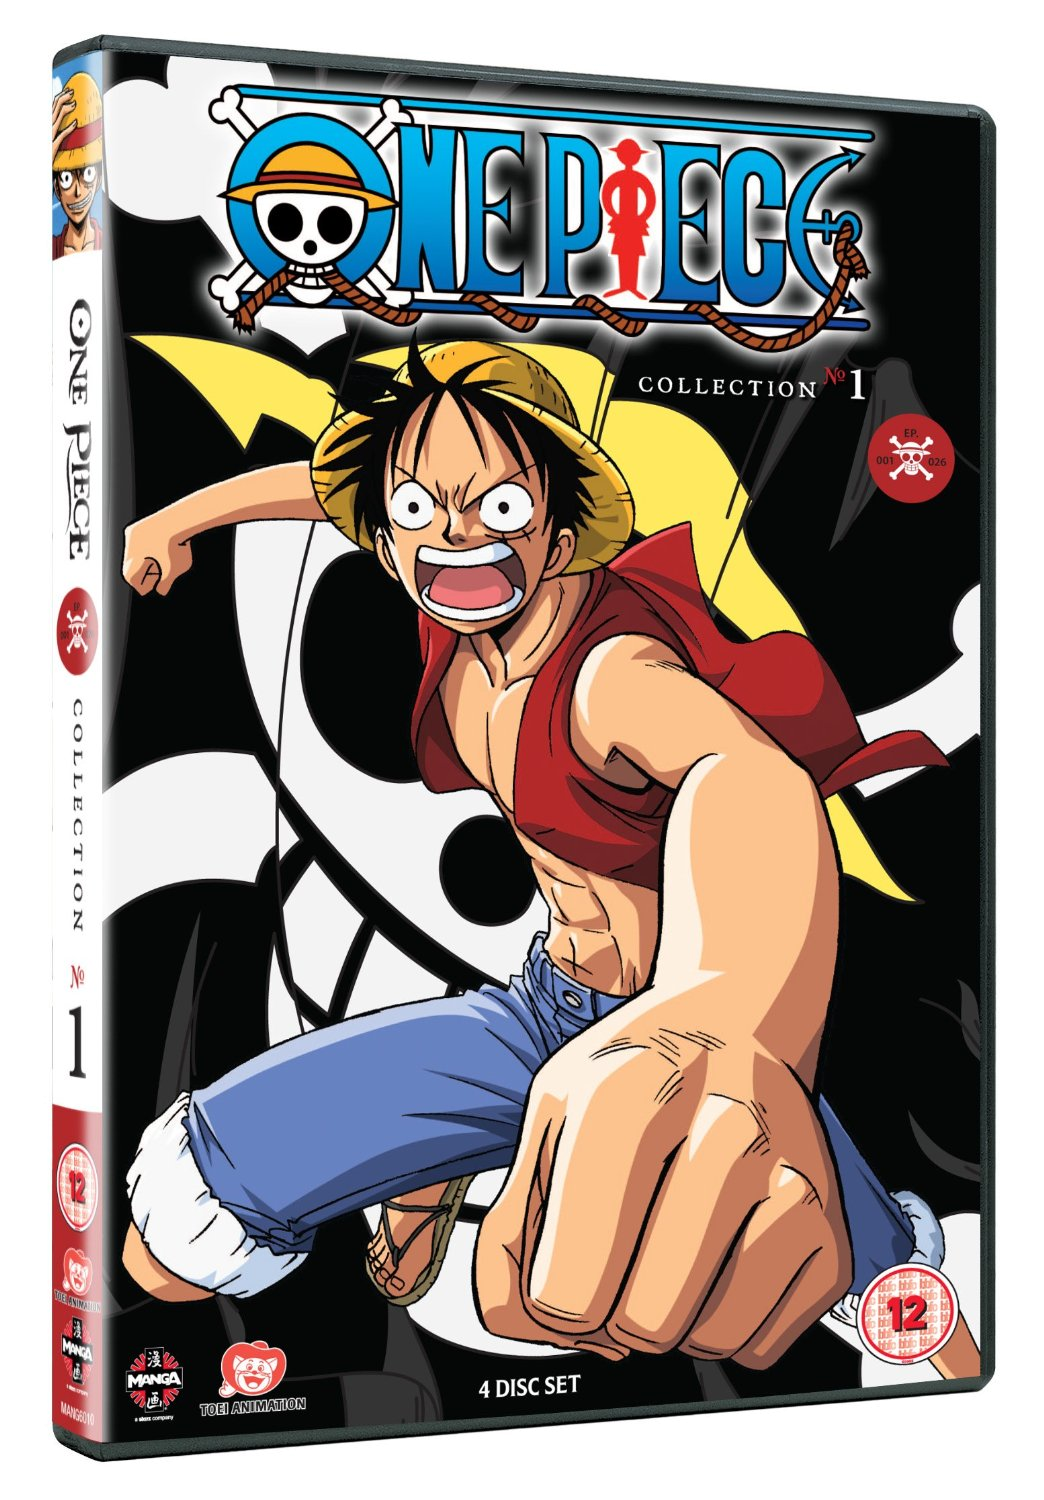 First One Piece chapter 1062 update disappoints fandom